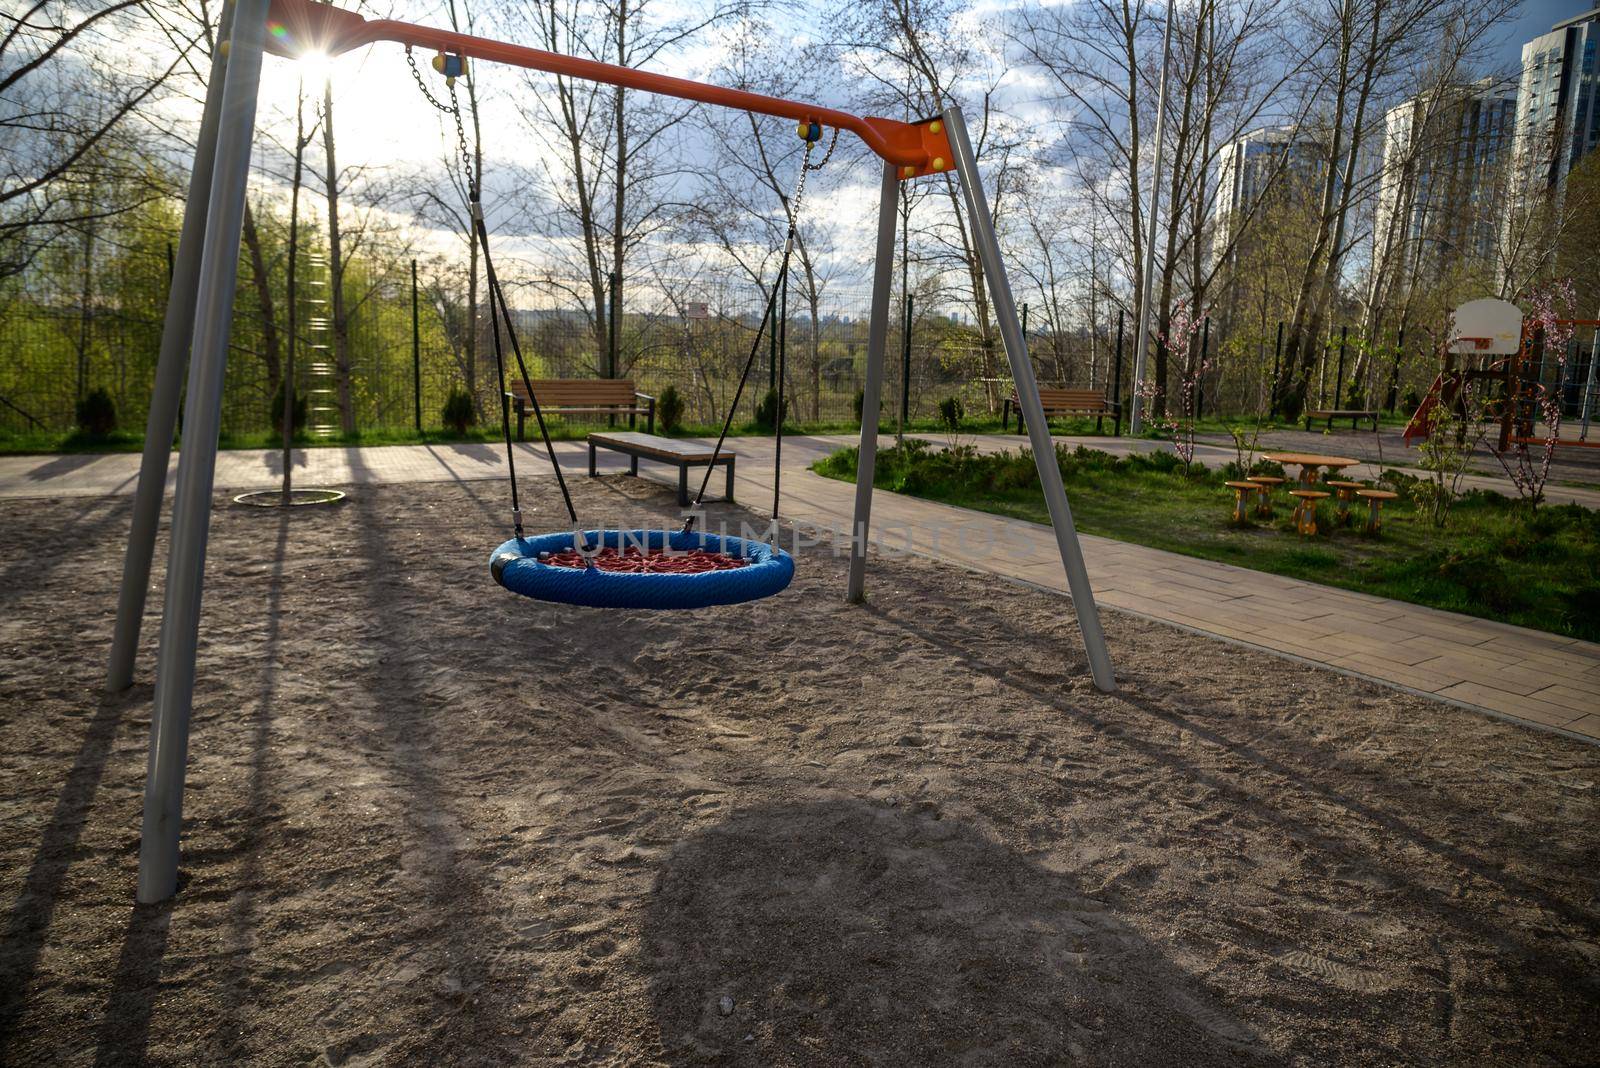 Round swing seat made of mesh in playground. Empty blue and red rope web nest for swinging closeup. children's swing High quality photo by Kobysh